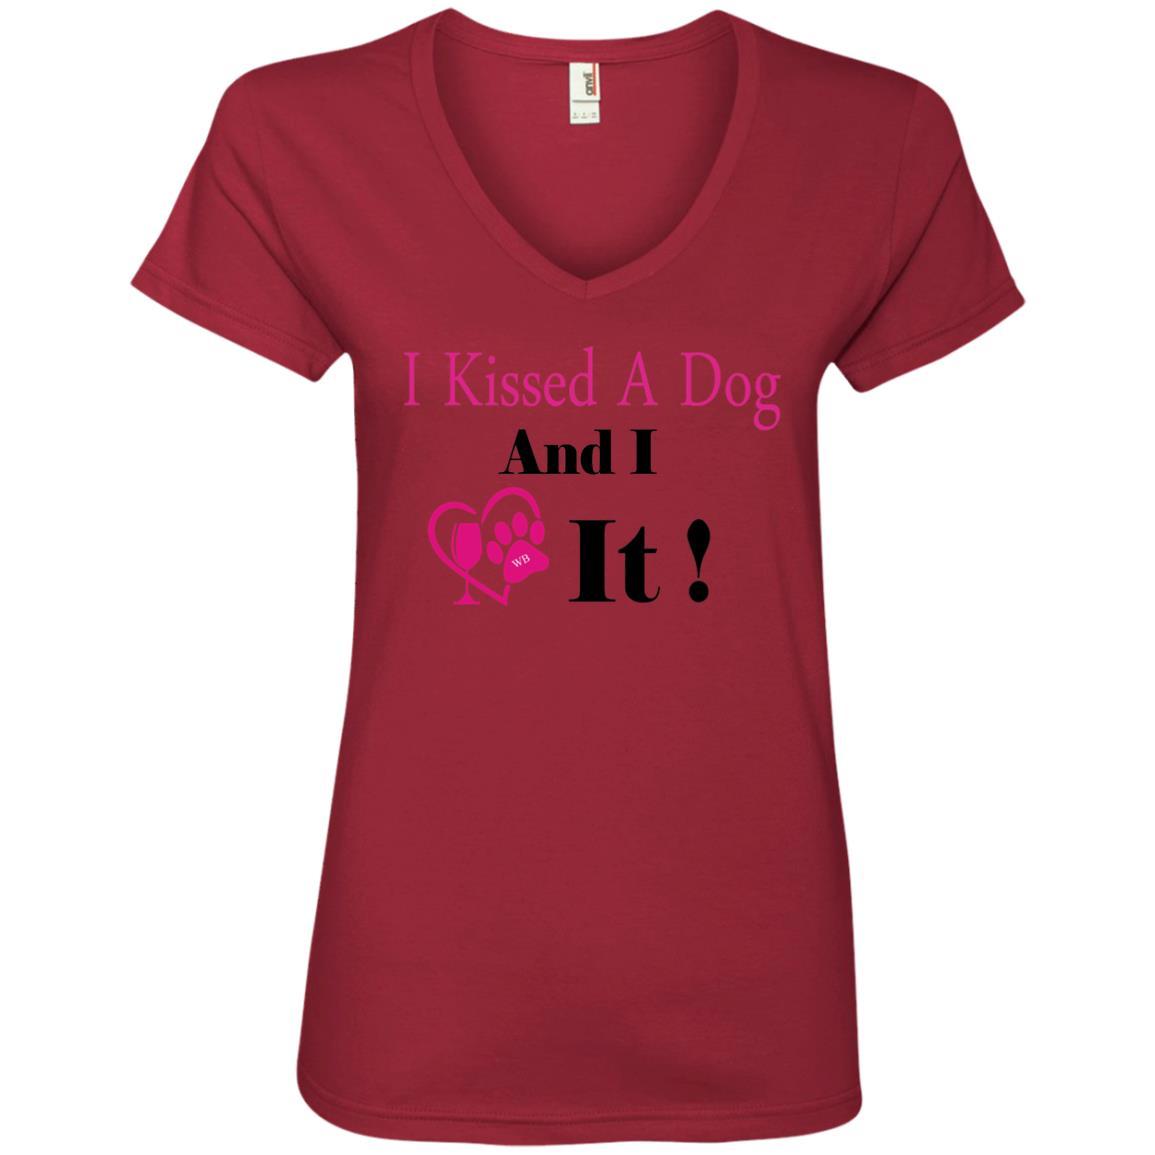 T-Shirts Independence Red / S WineyBitches.co "I Kissed A Dog And I Loved It:" Ladies' V-Neck T-Shirt WineyBitchesCo